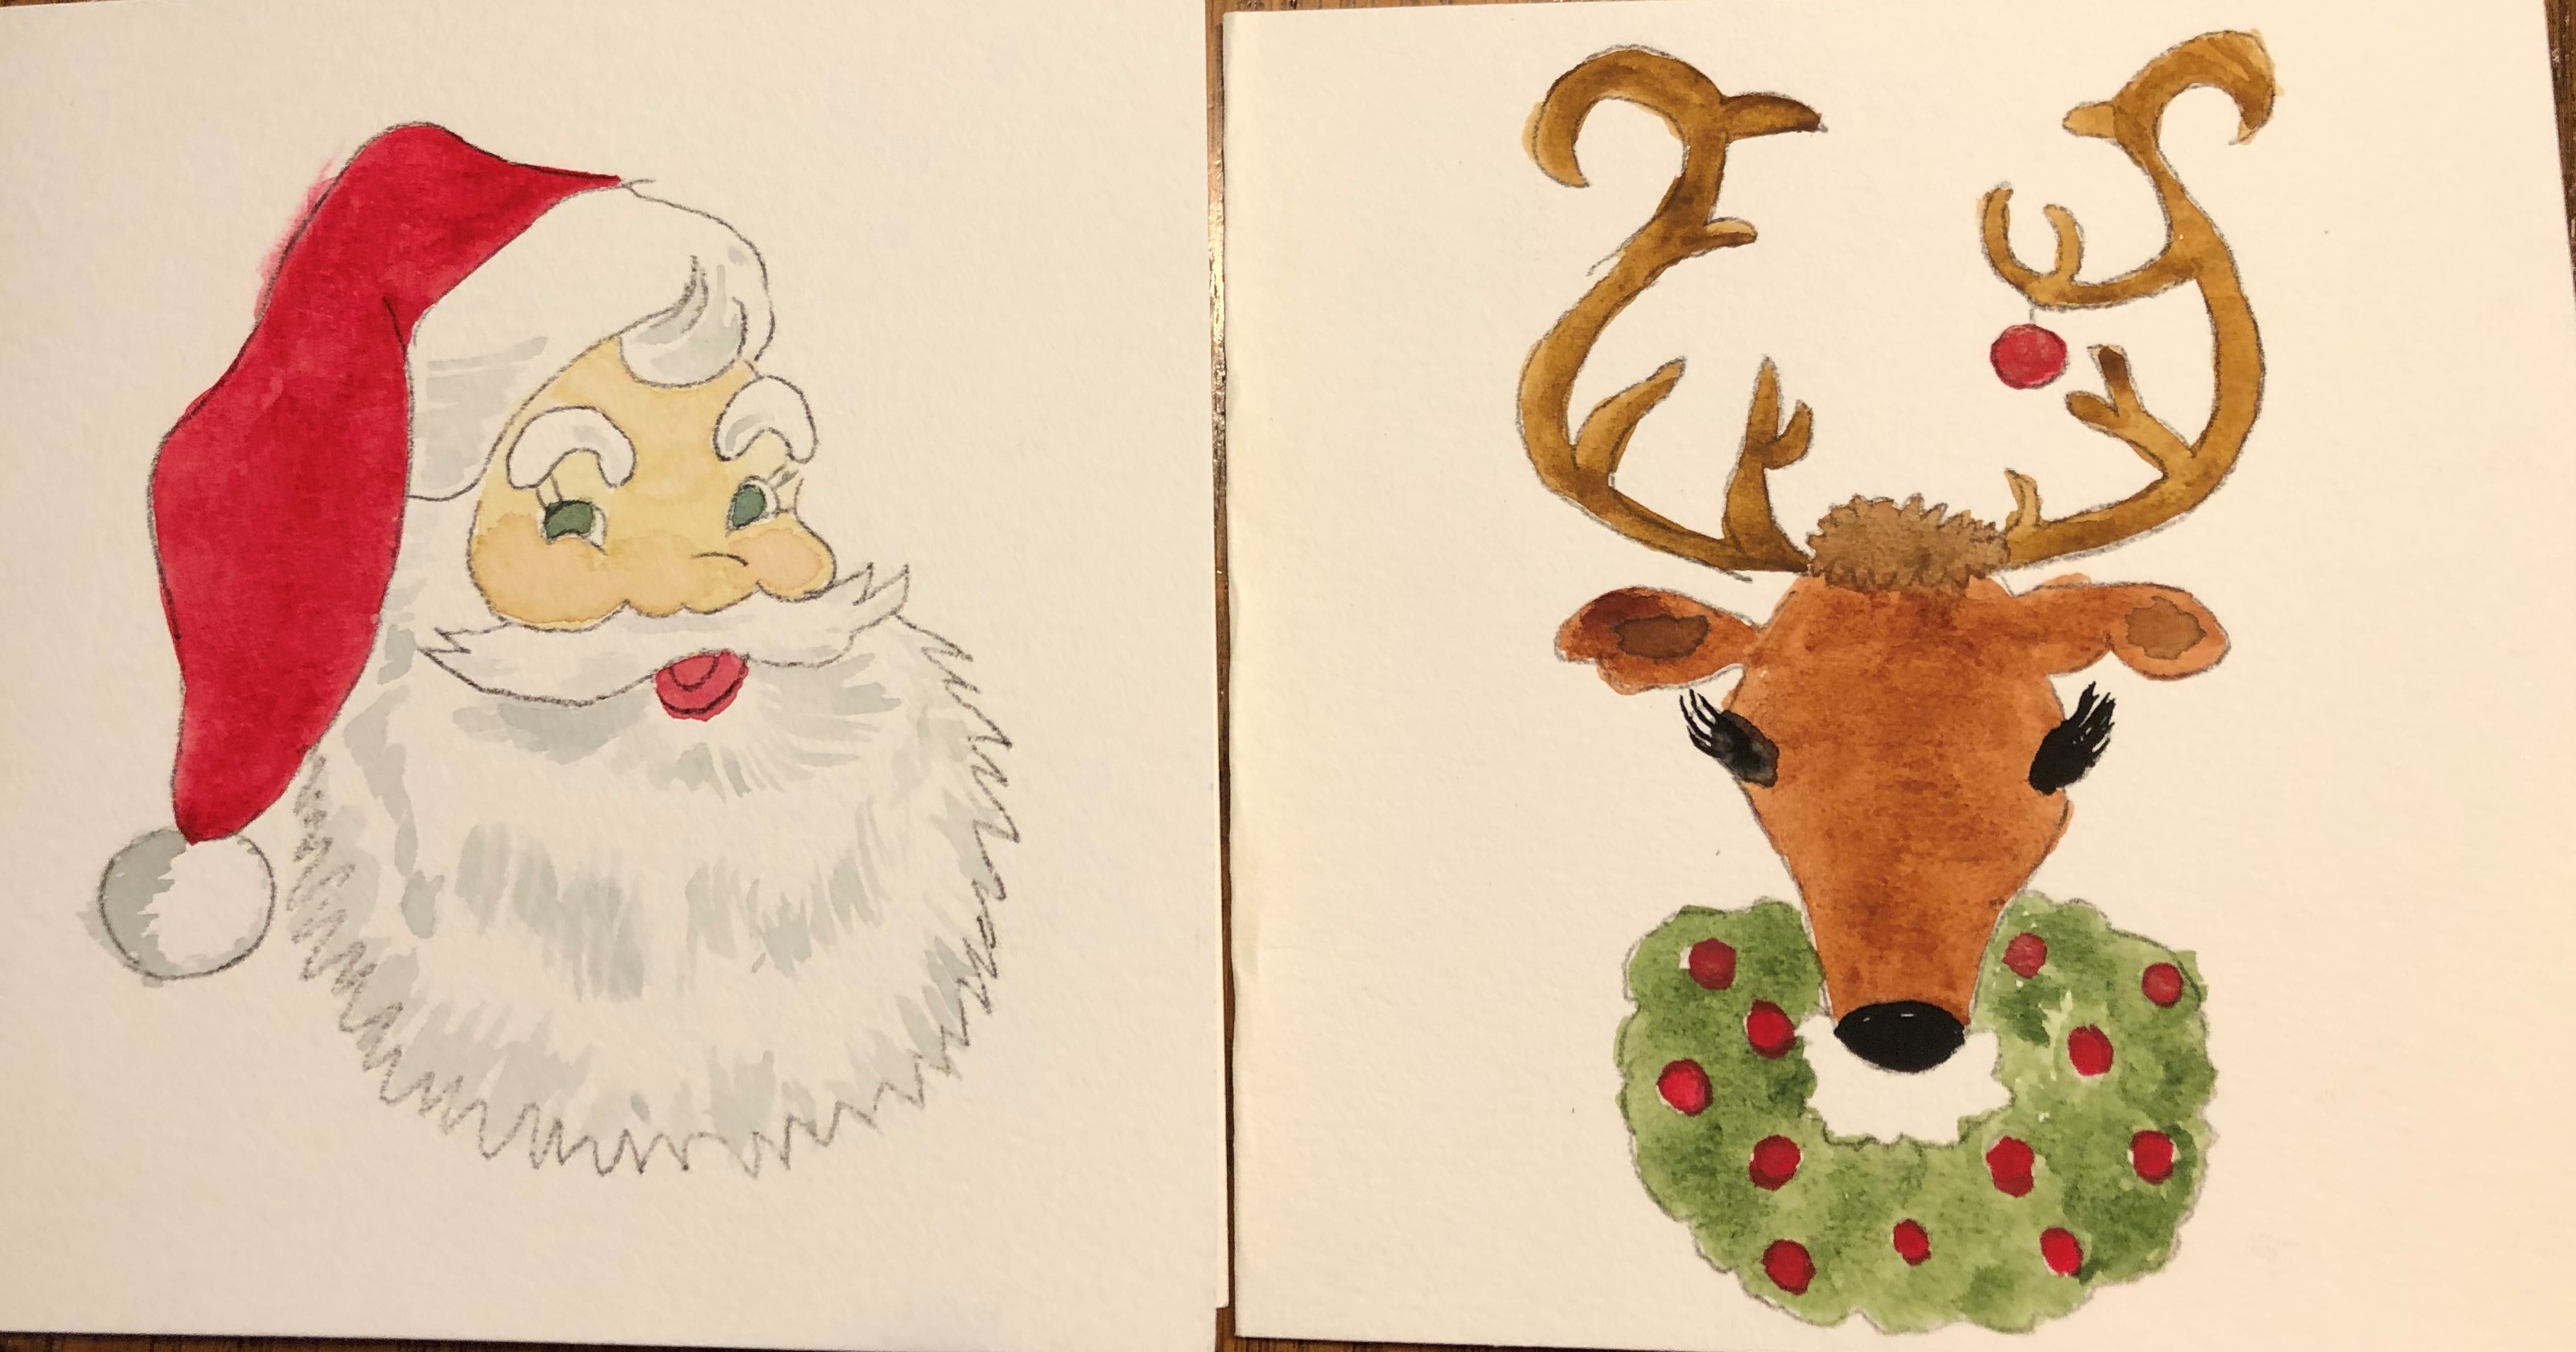 Watercolor painting of Santa and a brown reindeer with antlers and a green wreath